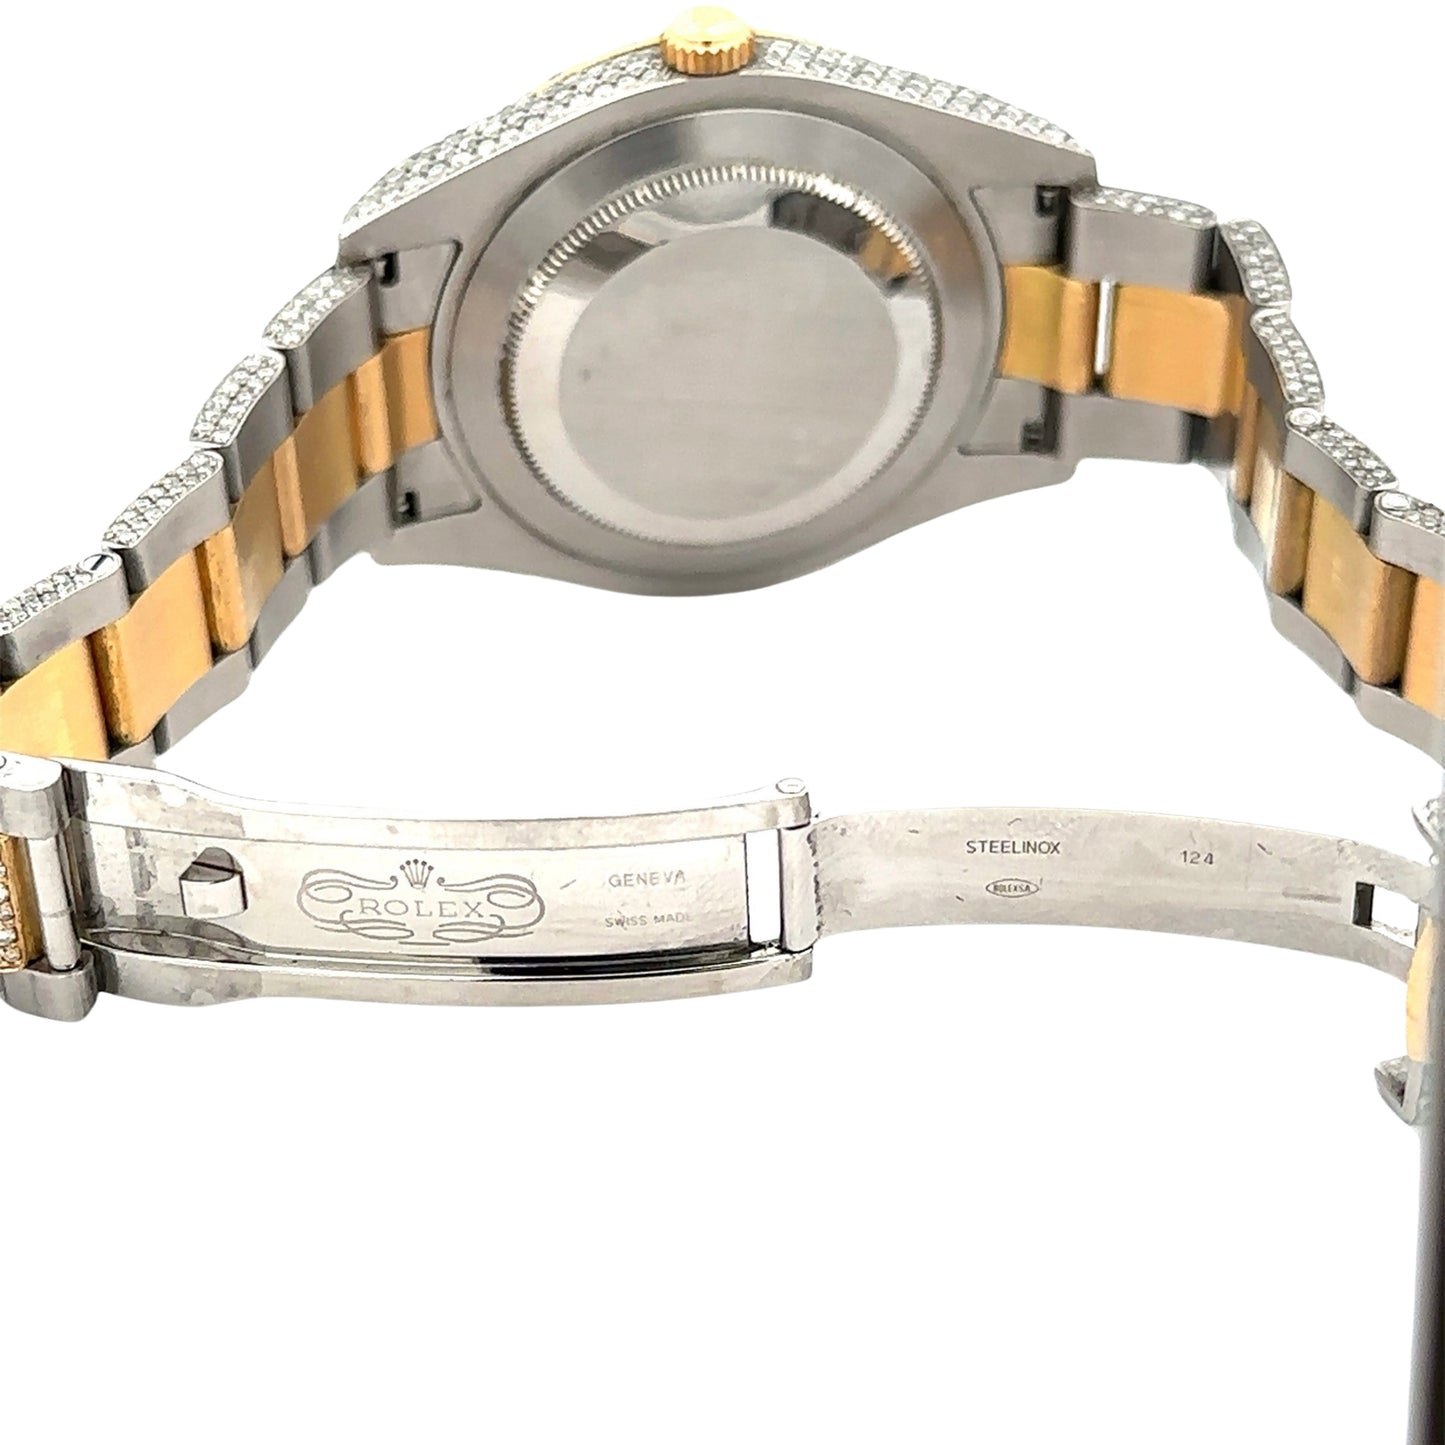 Back of Rolex clasp with Rolex logo and steelknox